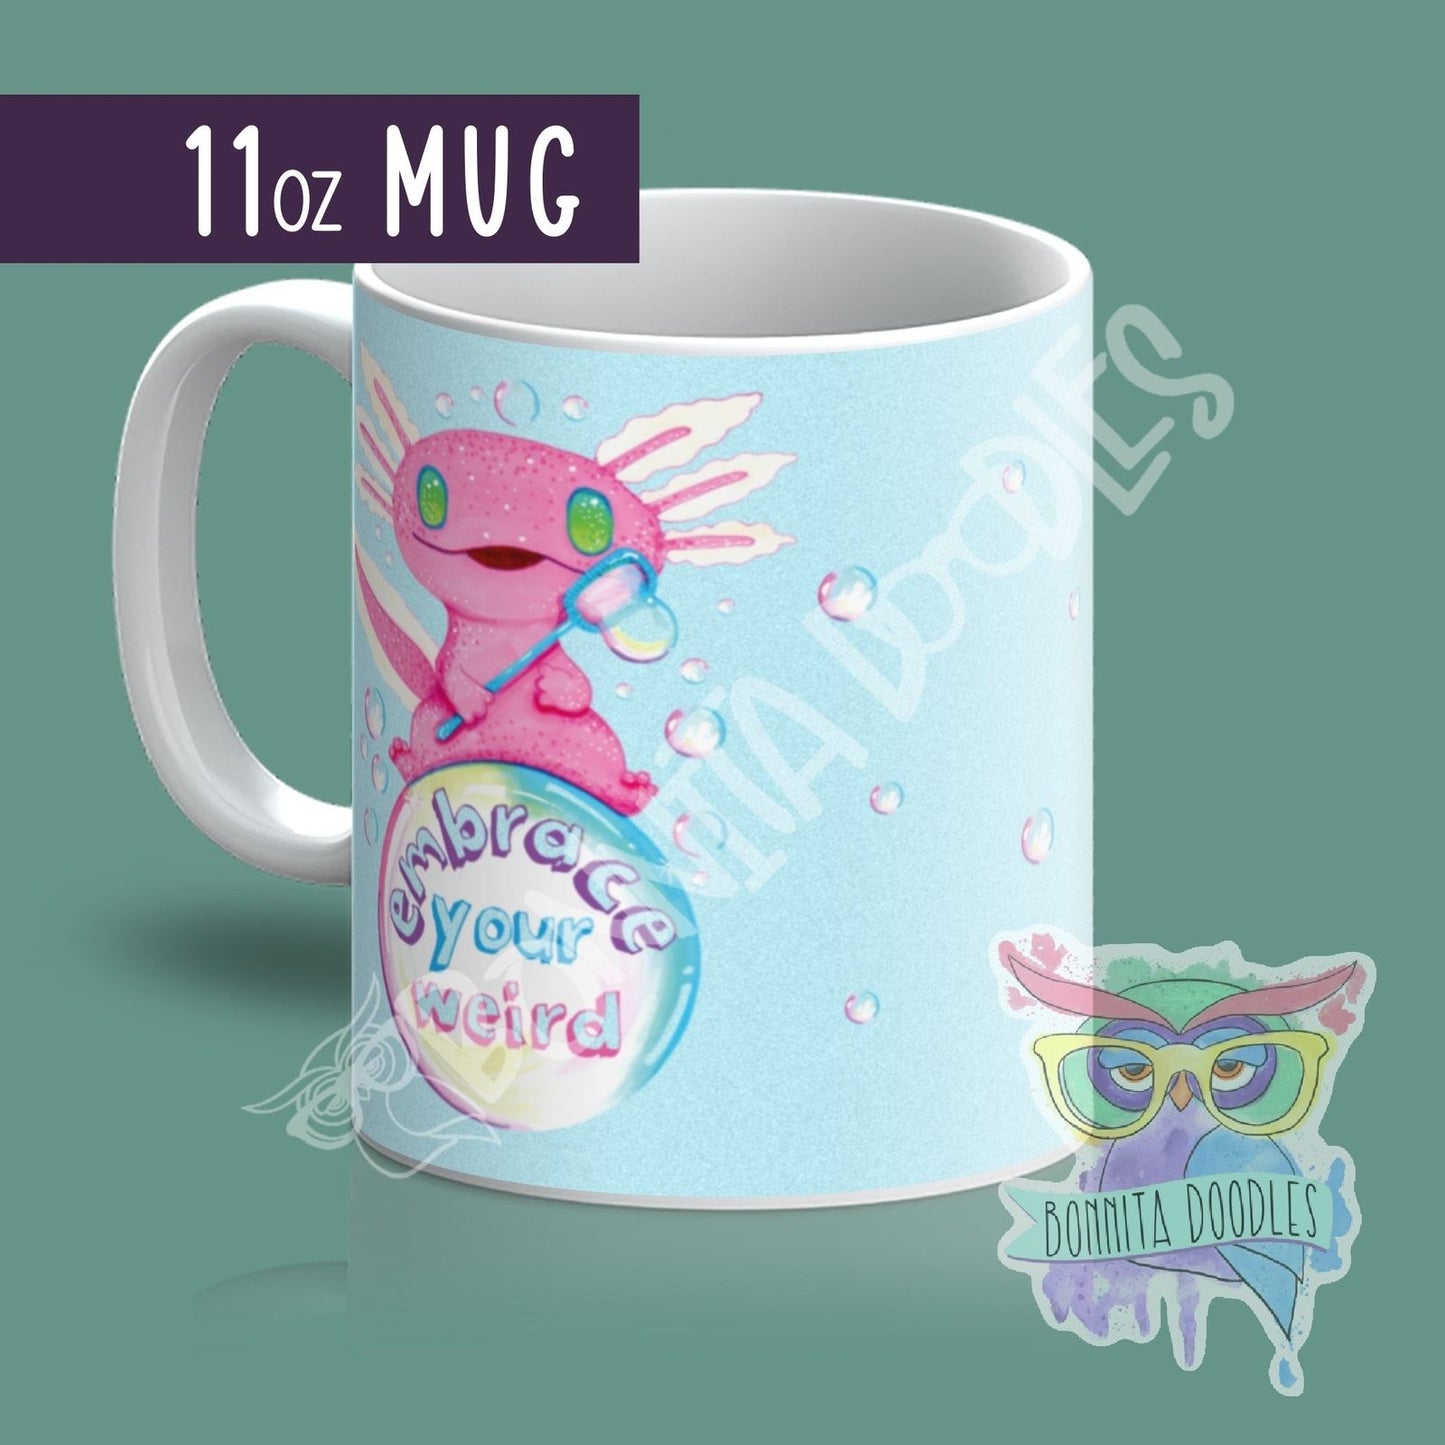 Embrace your weird mug - made to order - can be personalised